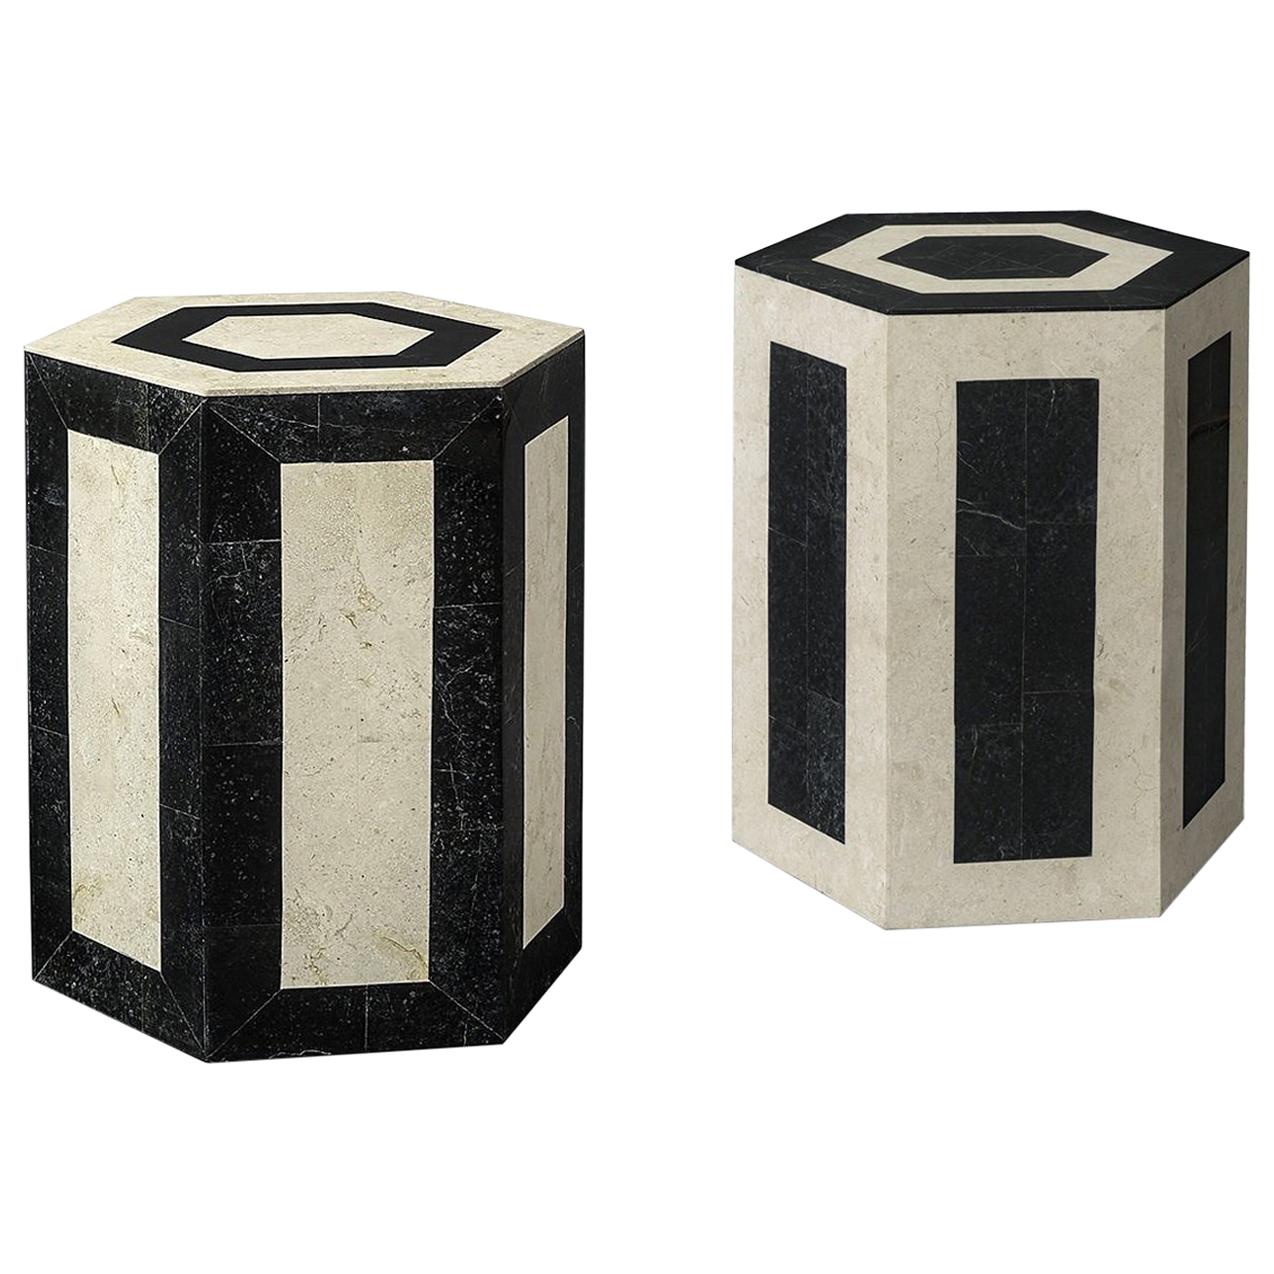 Set of 2 Laser Cut Stone Geometric Side Tables in Black and Cream